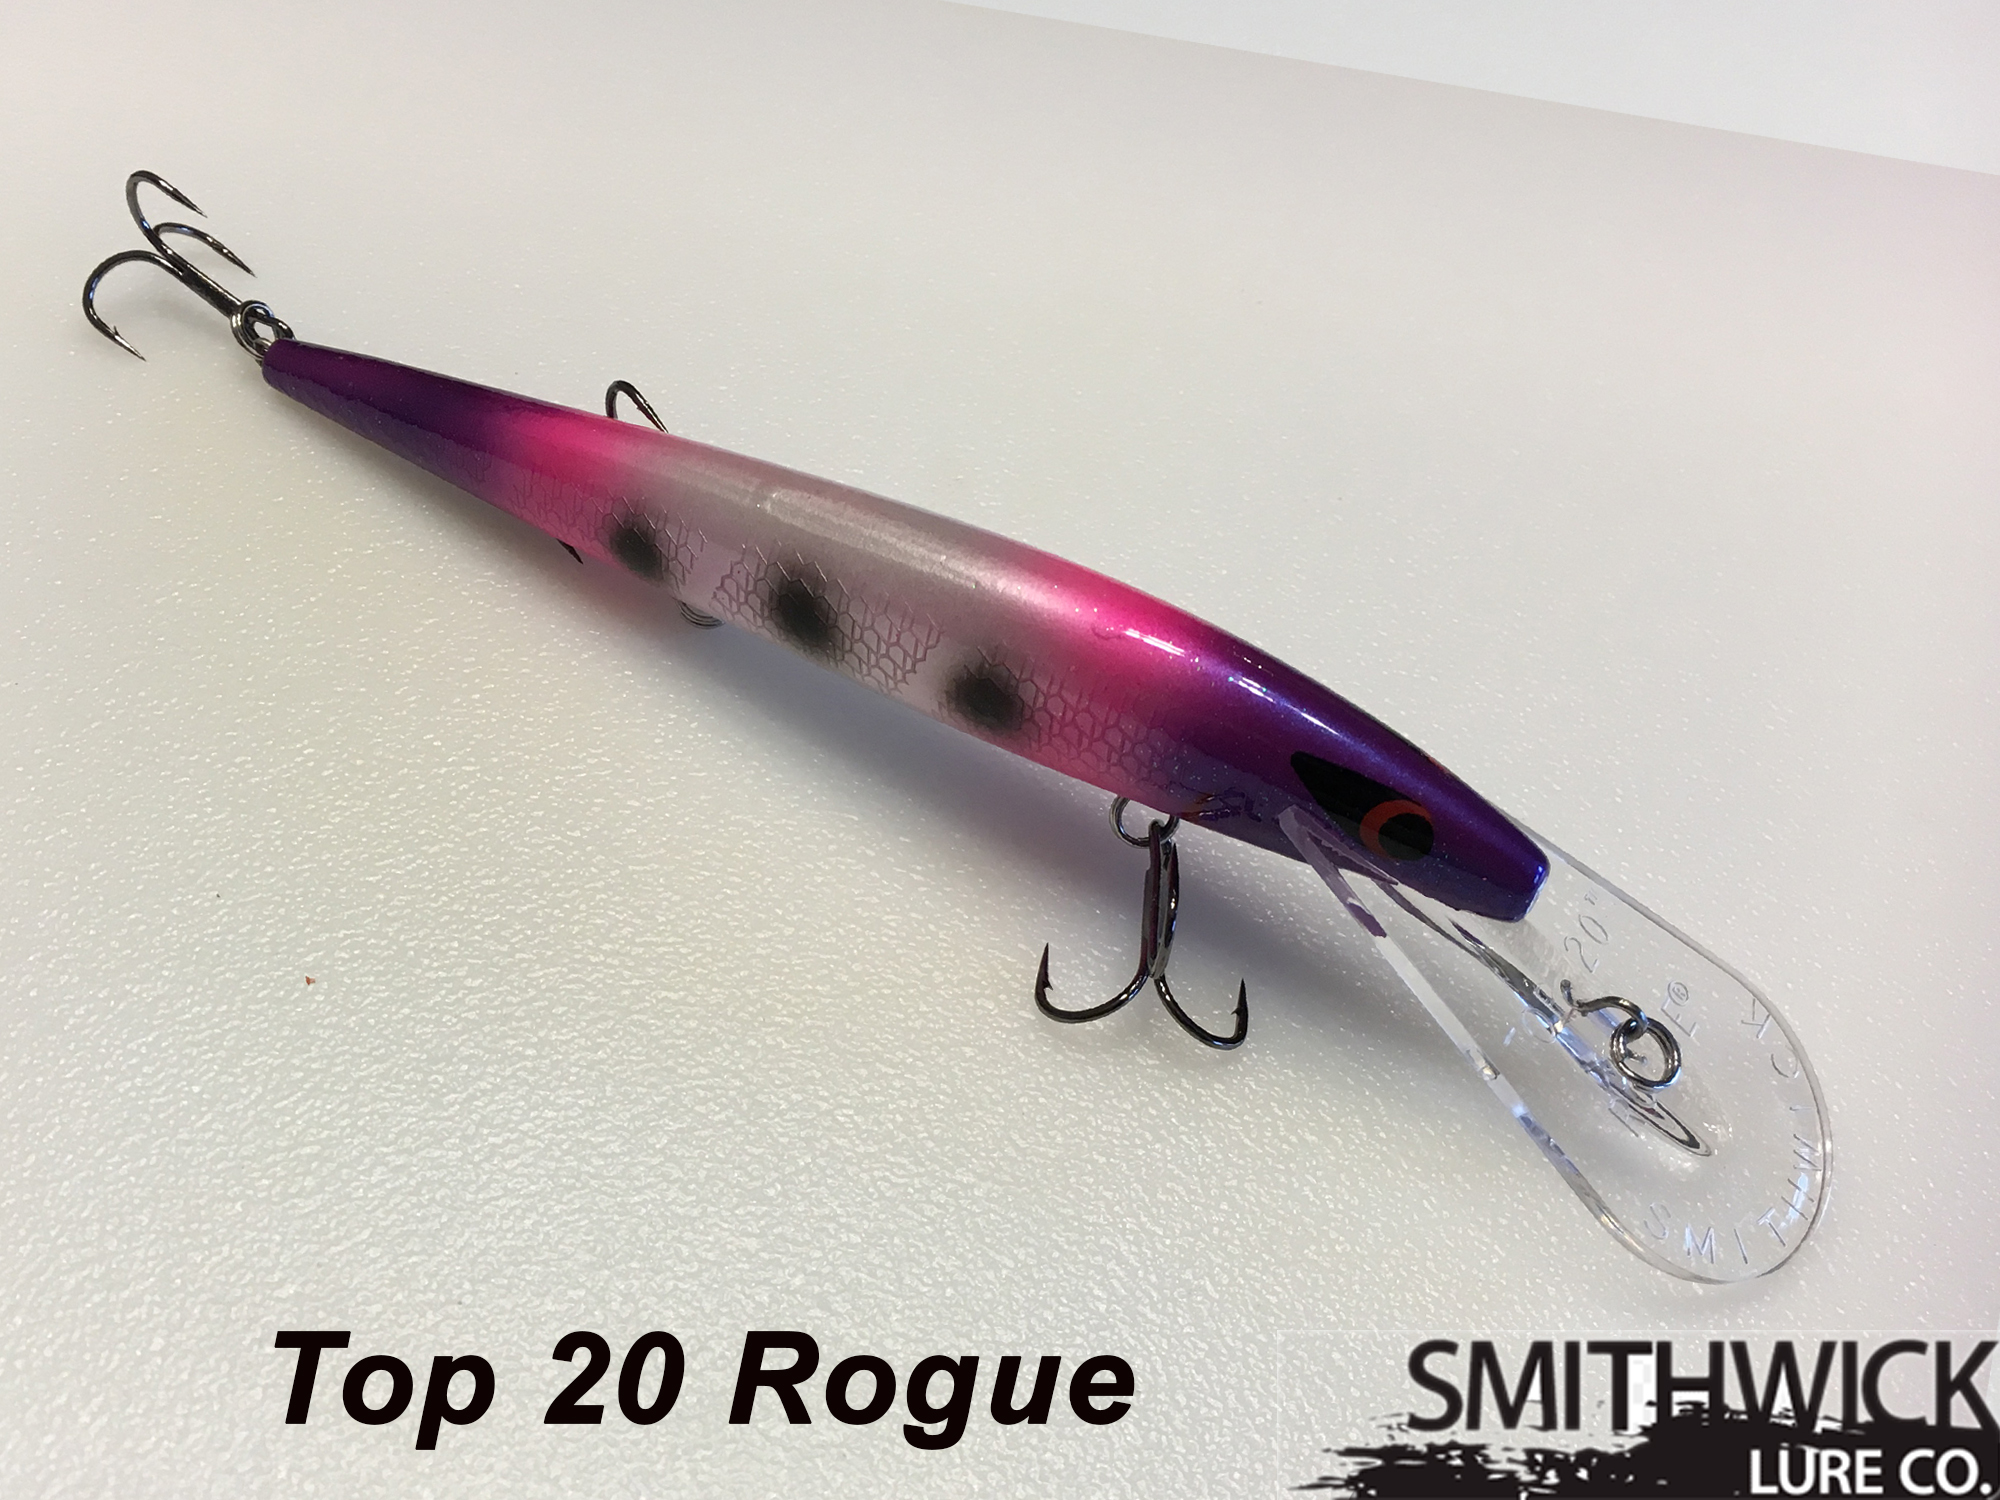 Smithwick Top 20 Rogue- - Erie Outfitters- Smithwick Top 20 Rogue